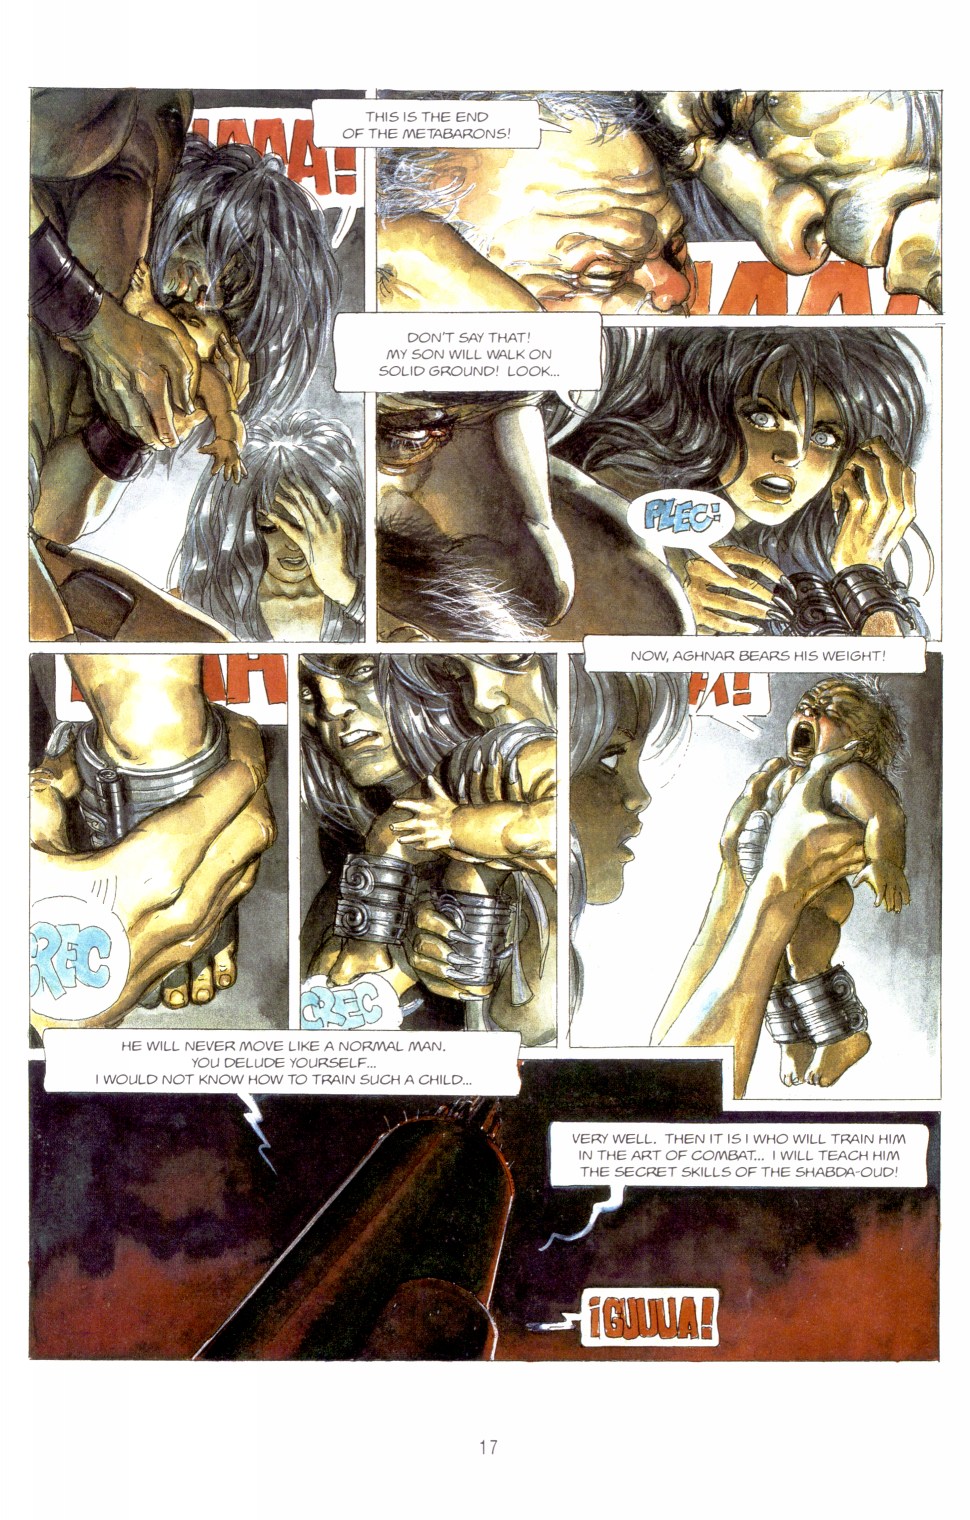 Read online The Metabarons comic -  Issue #4 - Honorata The Sorceres - 18